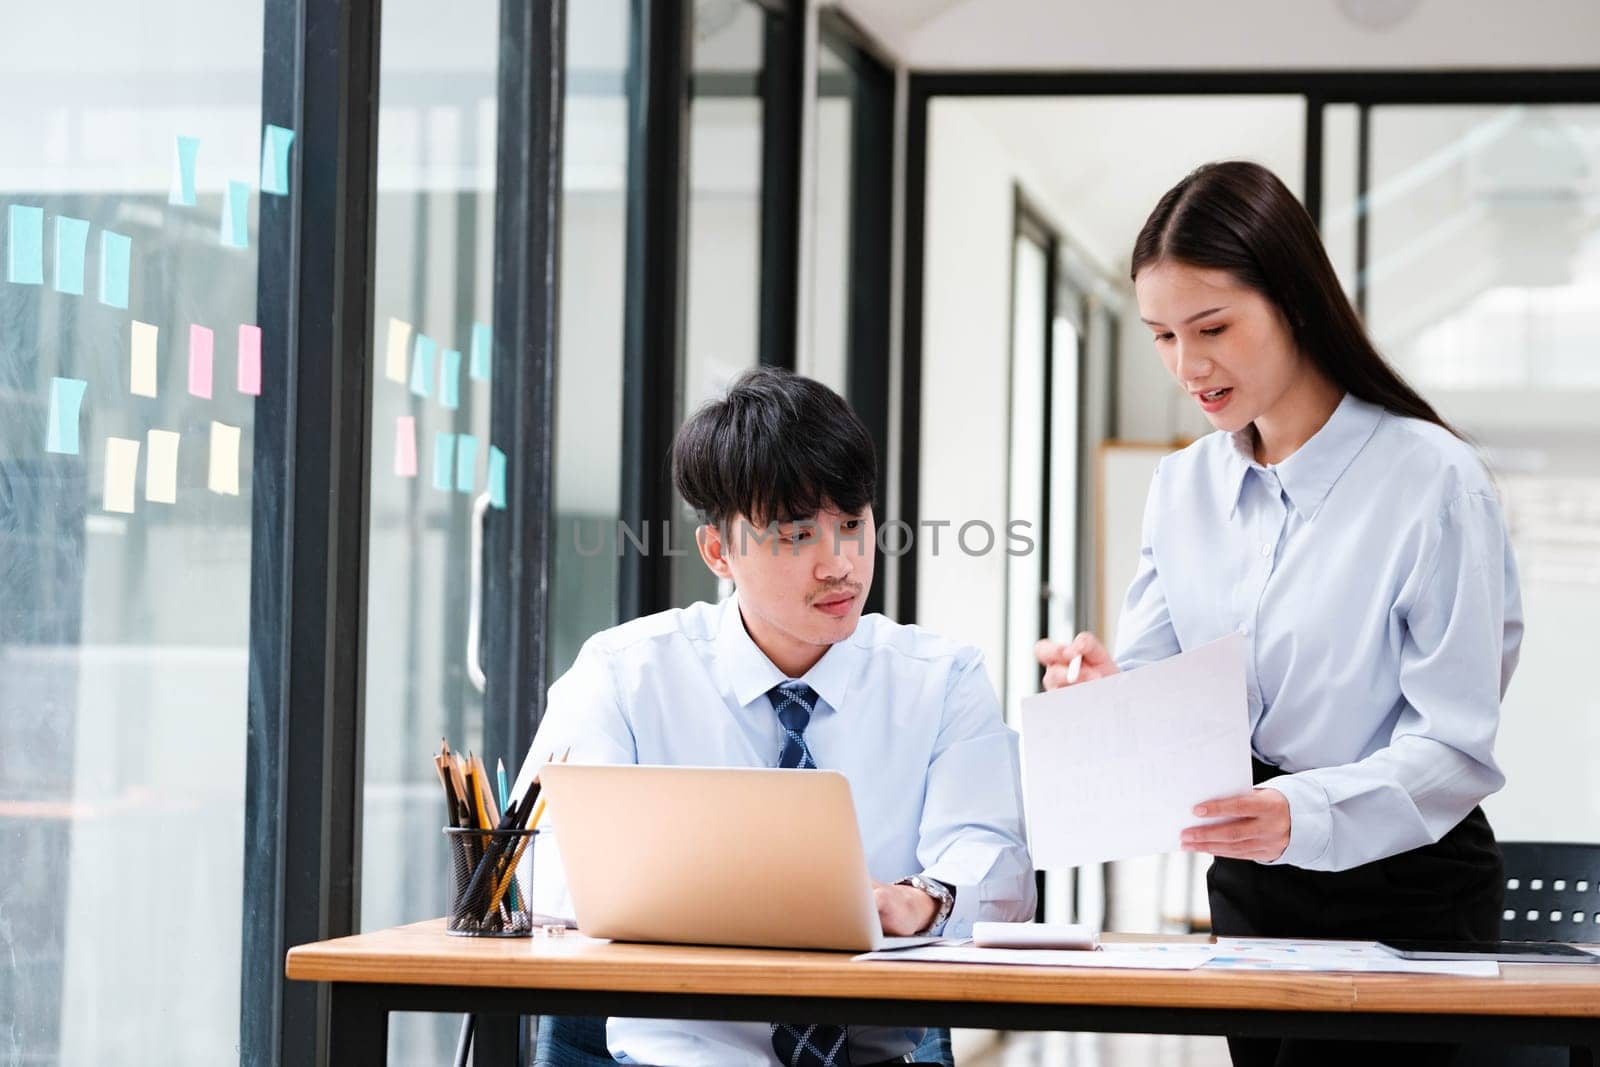 Businesswoman attempting to reason with a stressed colleague showing frustration at a workplace meeting.